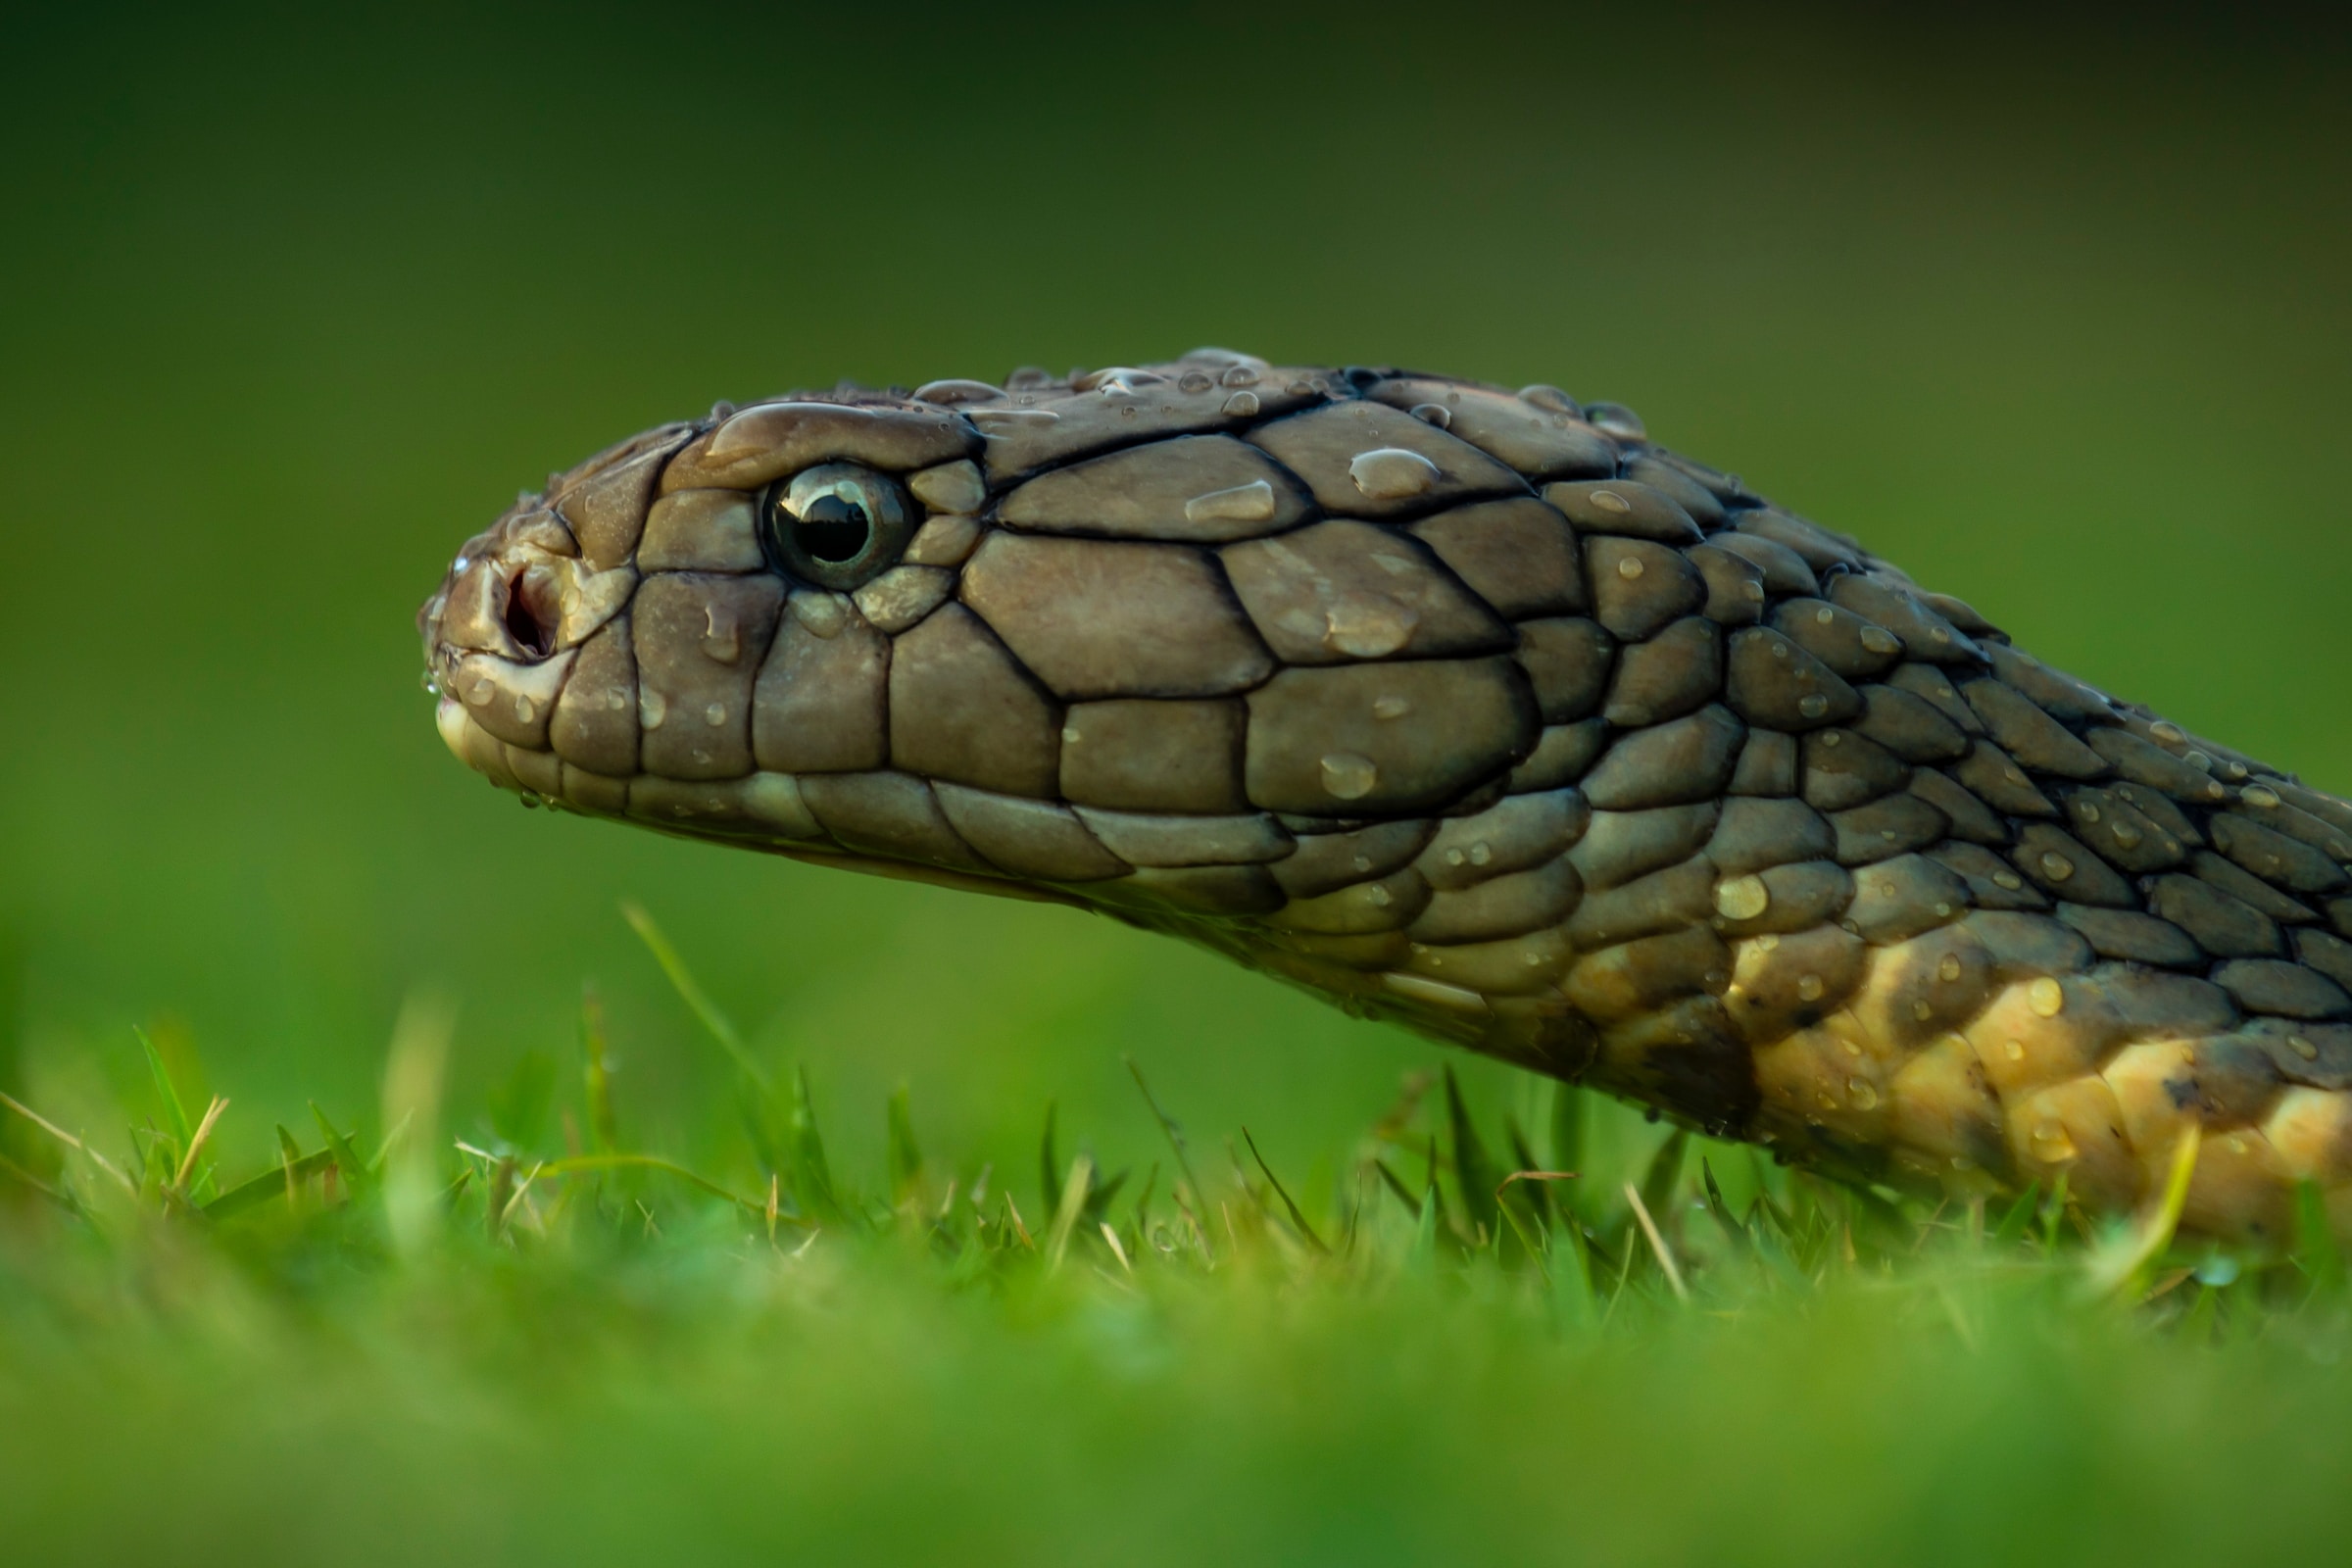 How to Keep Snakes Out of Your Home